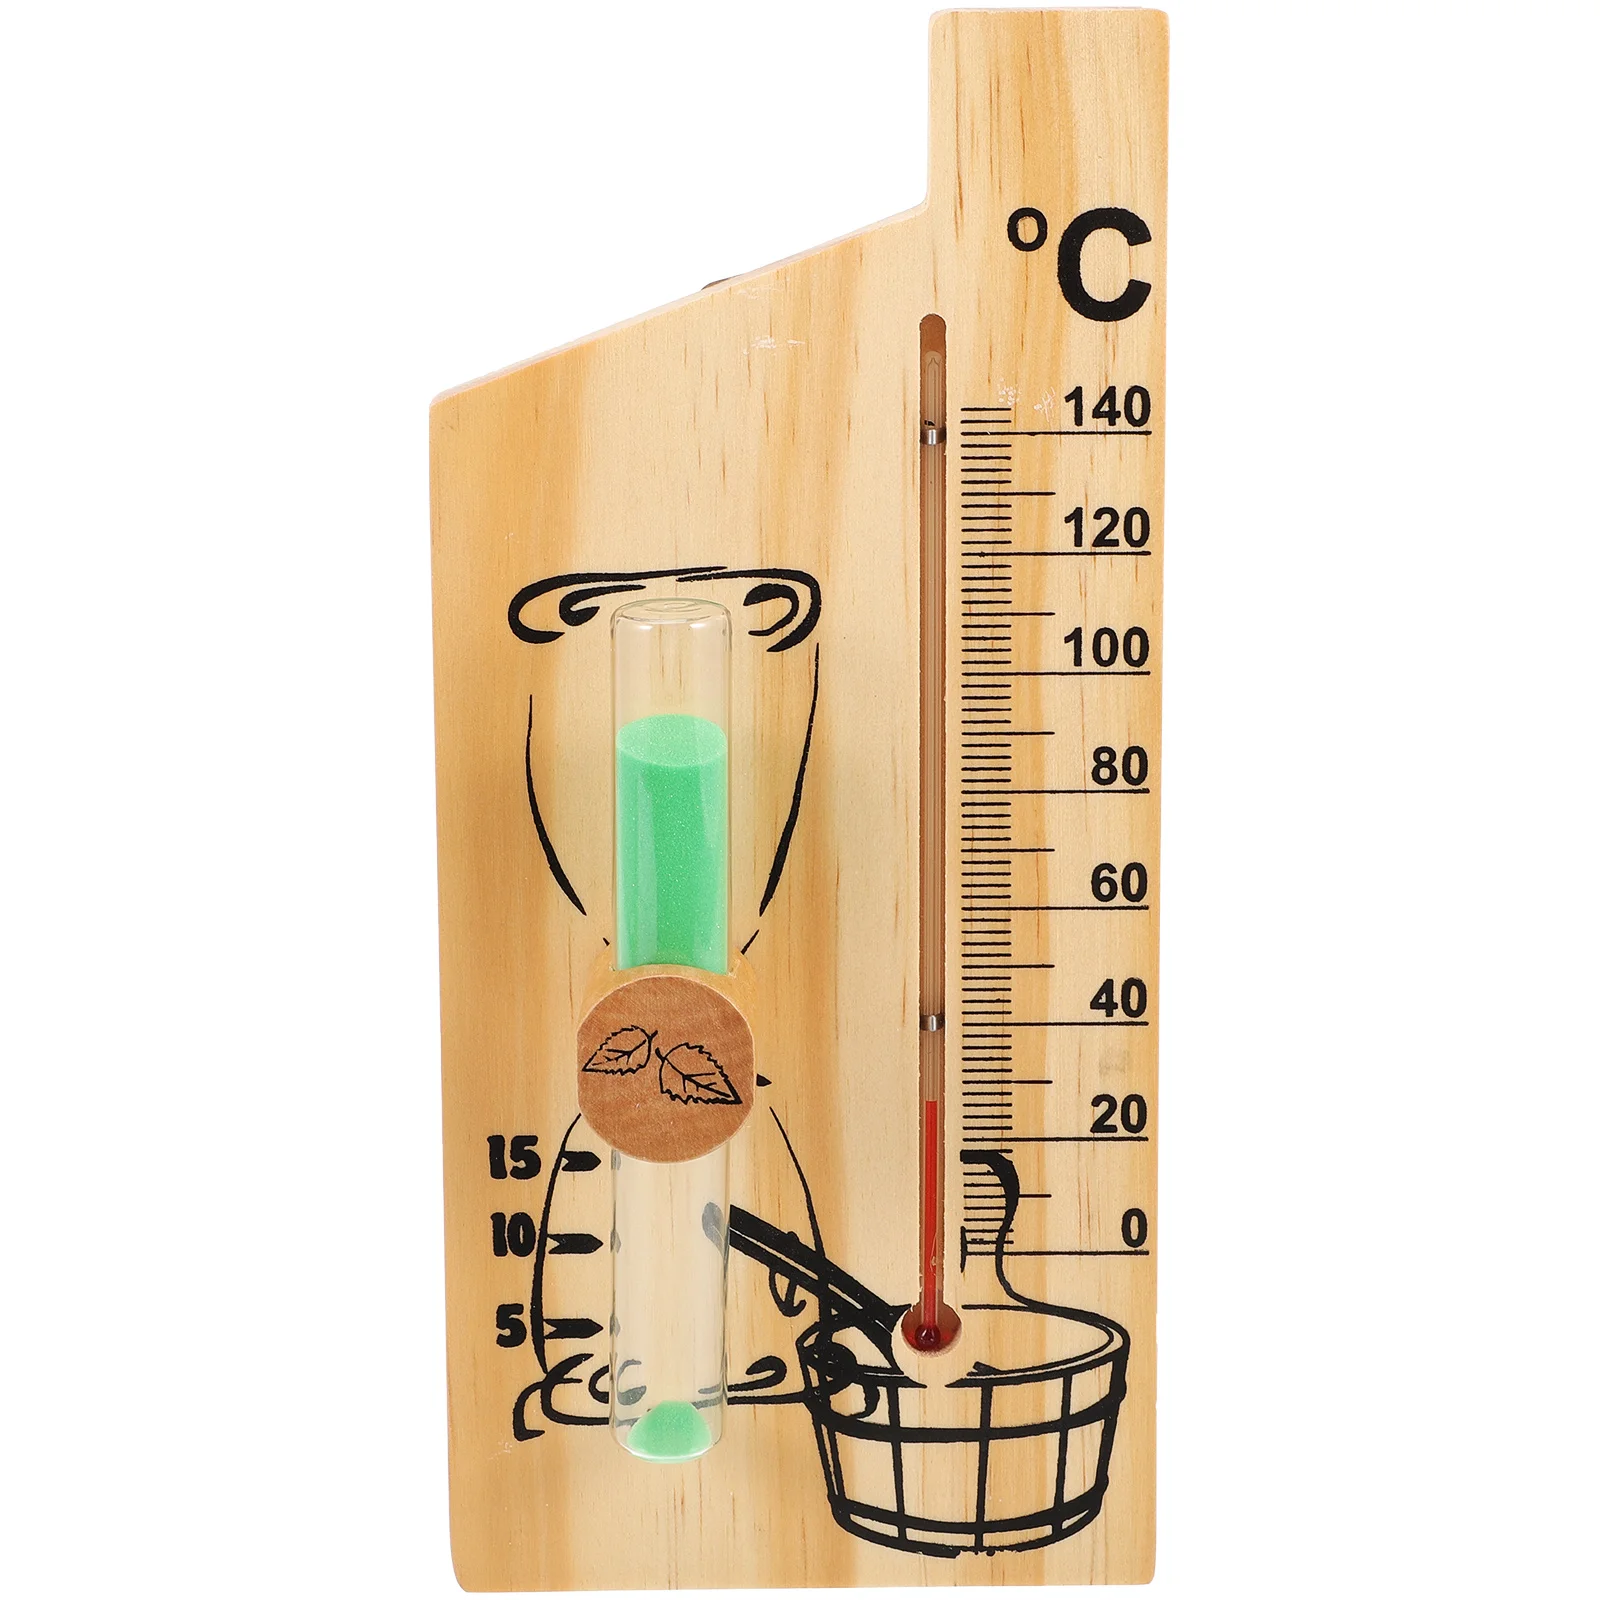 

Sauna Timer Household Hourglass Used Decor Wood Toys Reusable Clear Decorative Wall-mounted Reminding